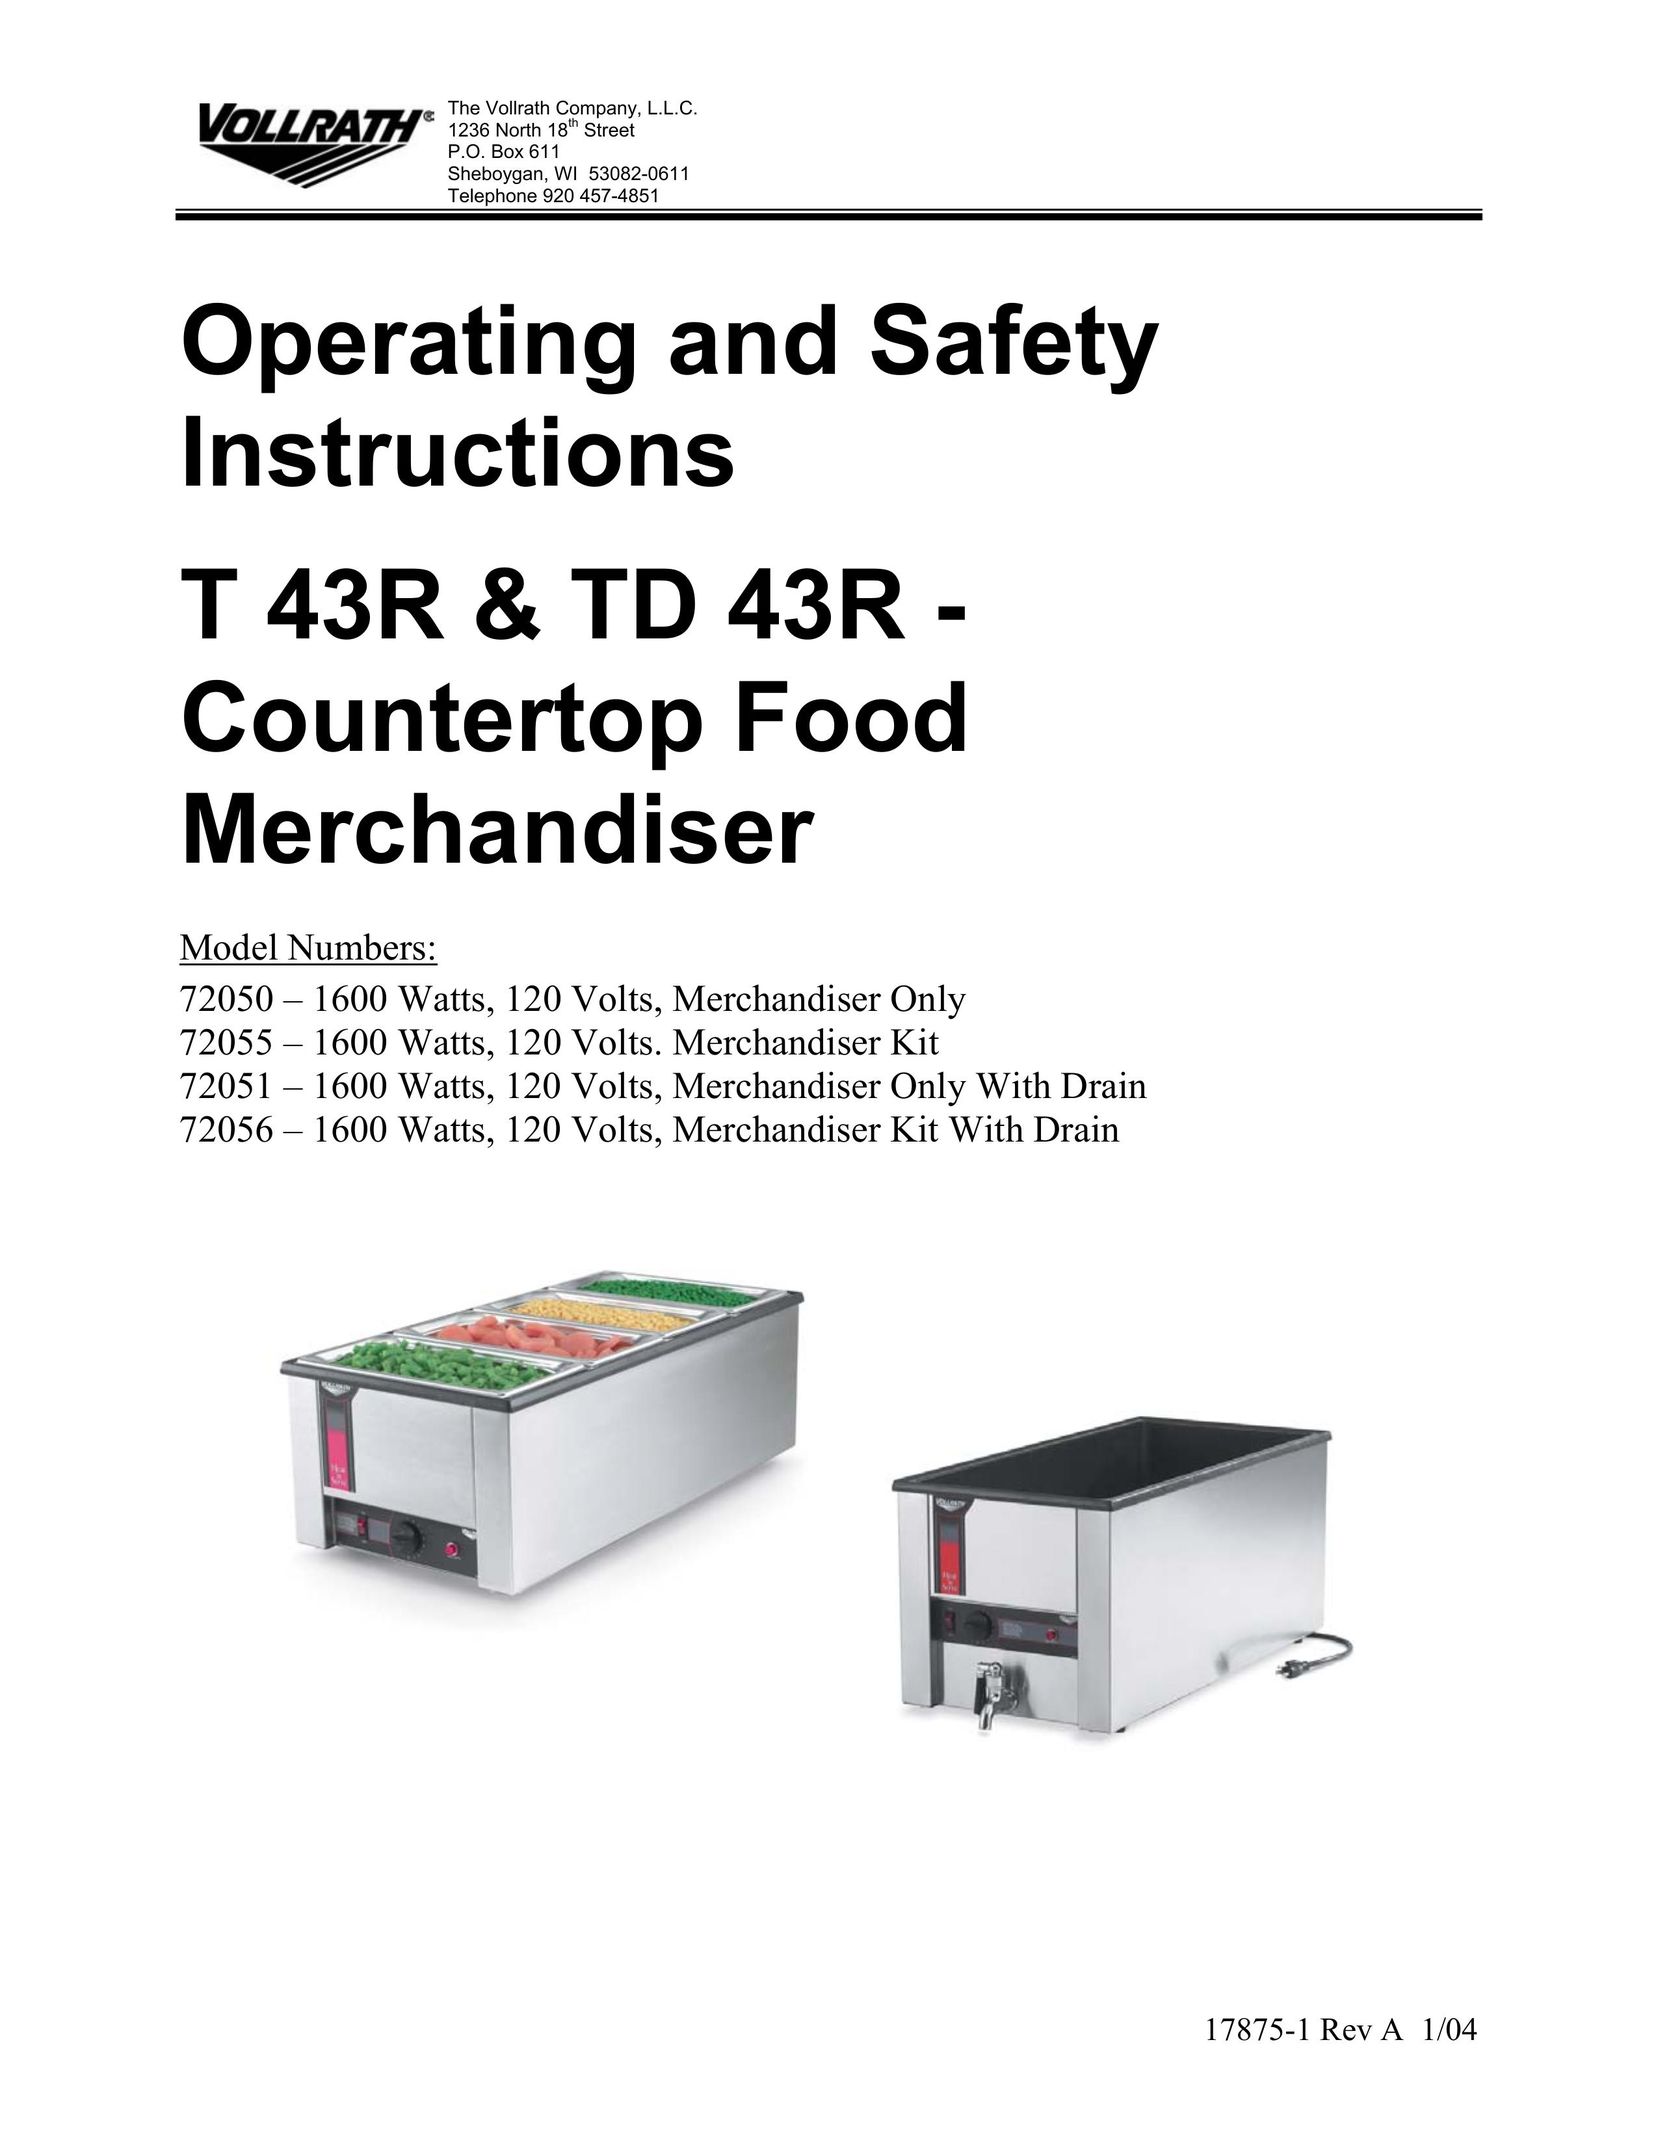 The Vollrath Co T 43R Cookware User Manual